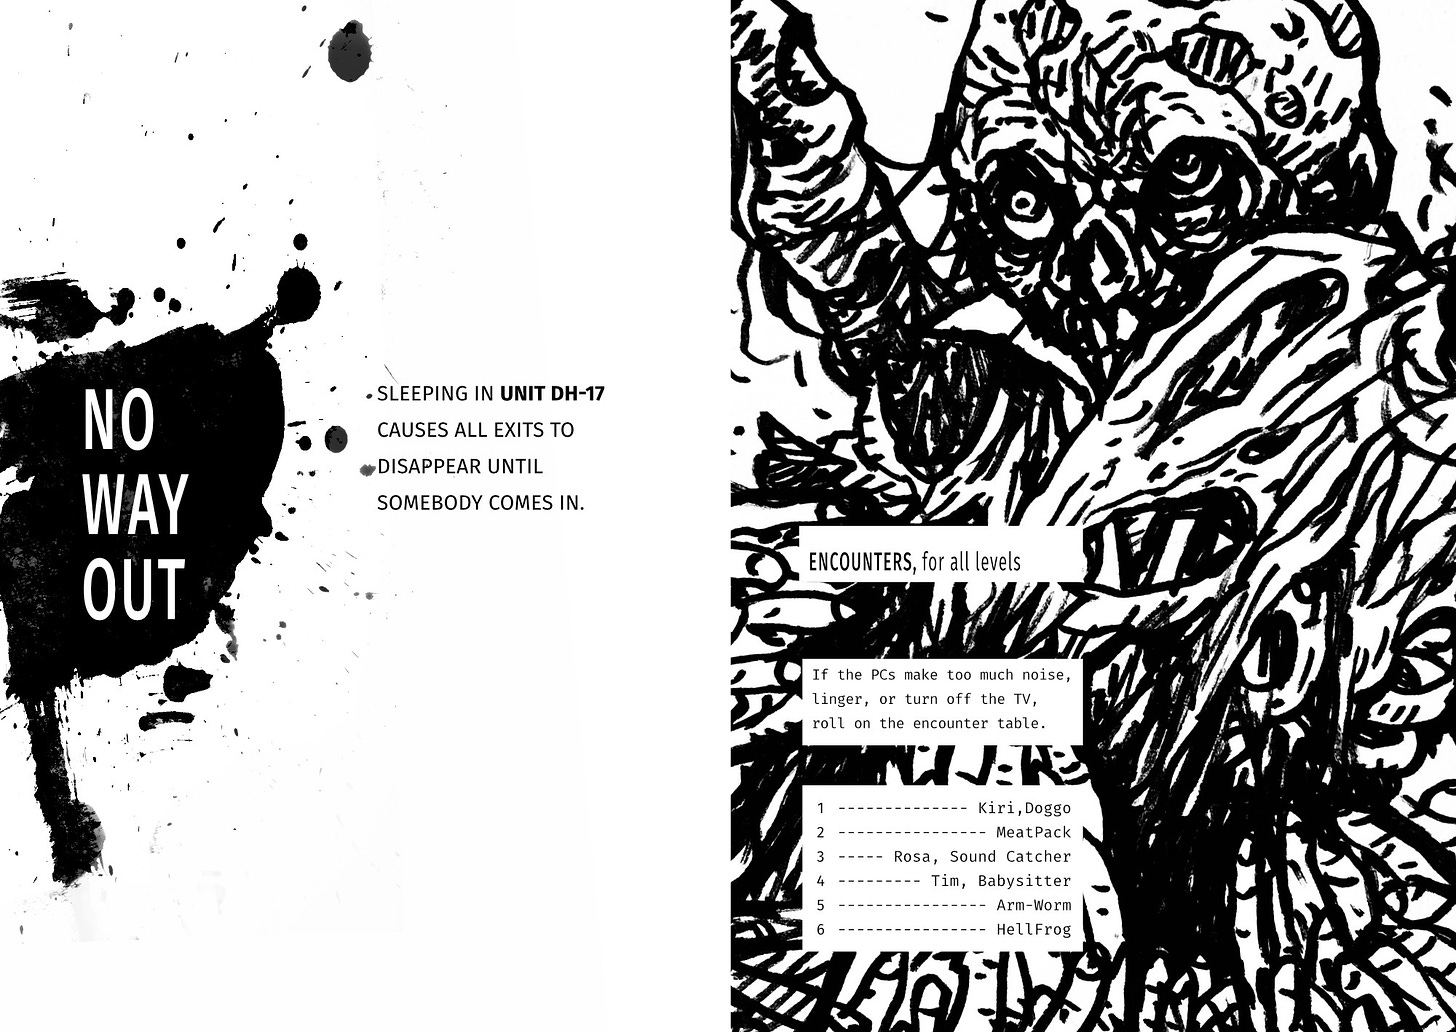 A two-page spread. On the left page, the words NO WAY OUT are framed by an ink splatter. On the right hand page, there is a messy ink illustration of a fleshy horror and a table listing things players might encounter in the dungeon.